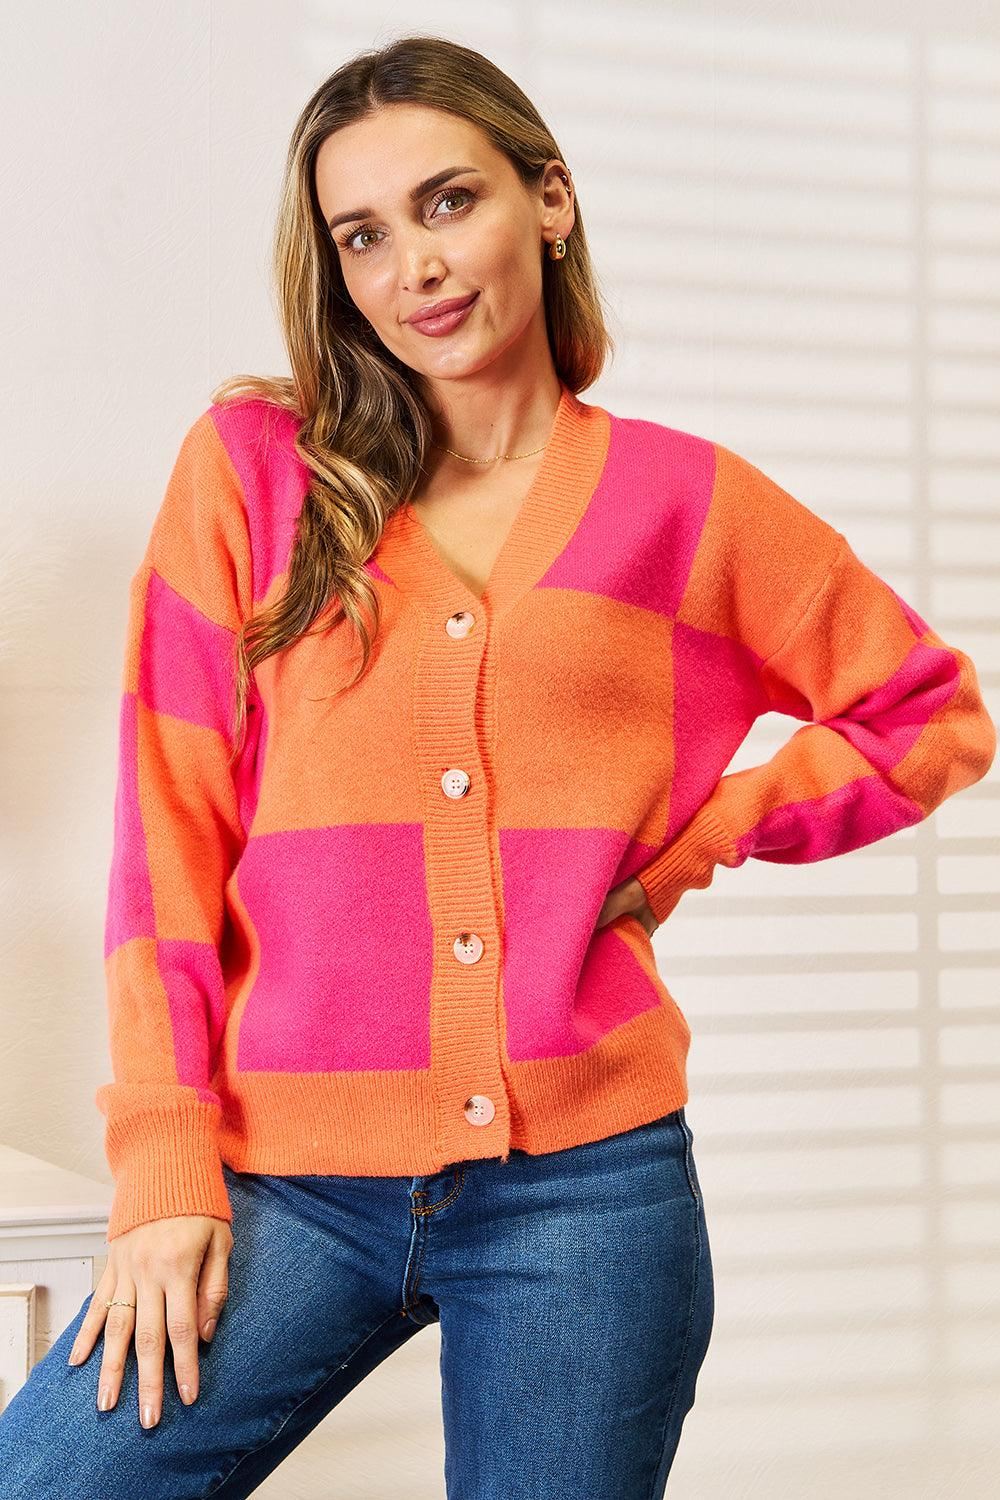 Orange and Hot Pink Checkered Cardigan - Inspired Eye Boutique